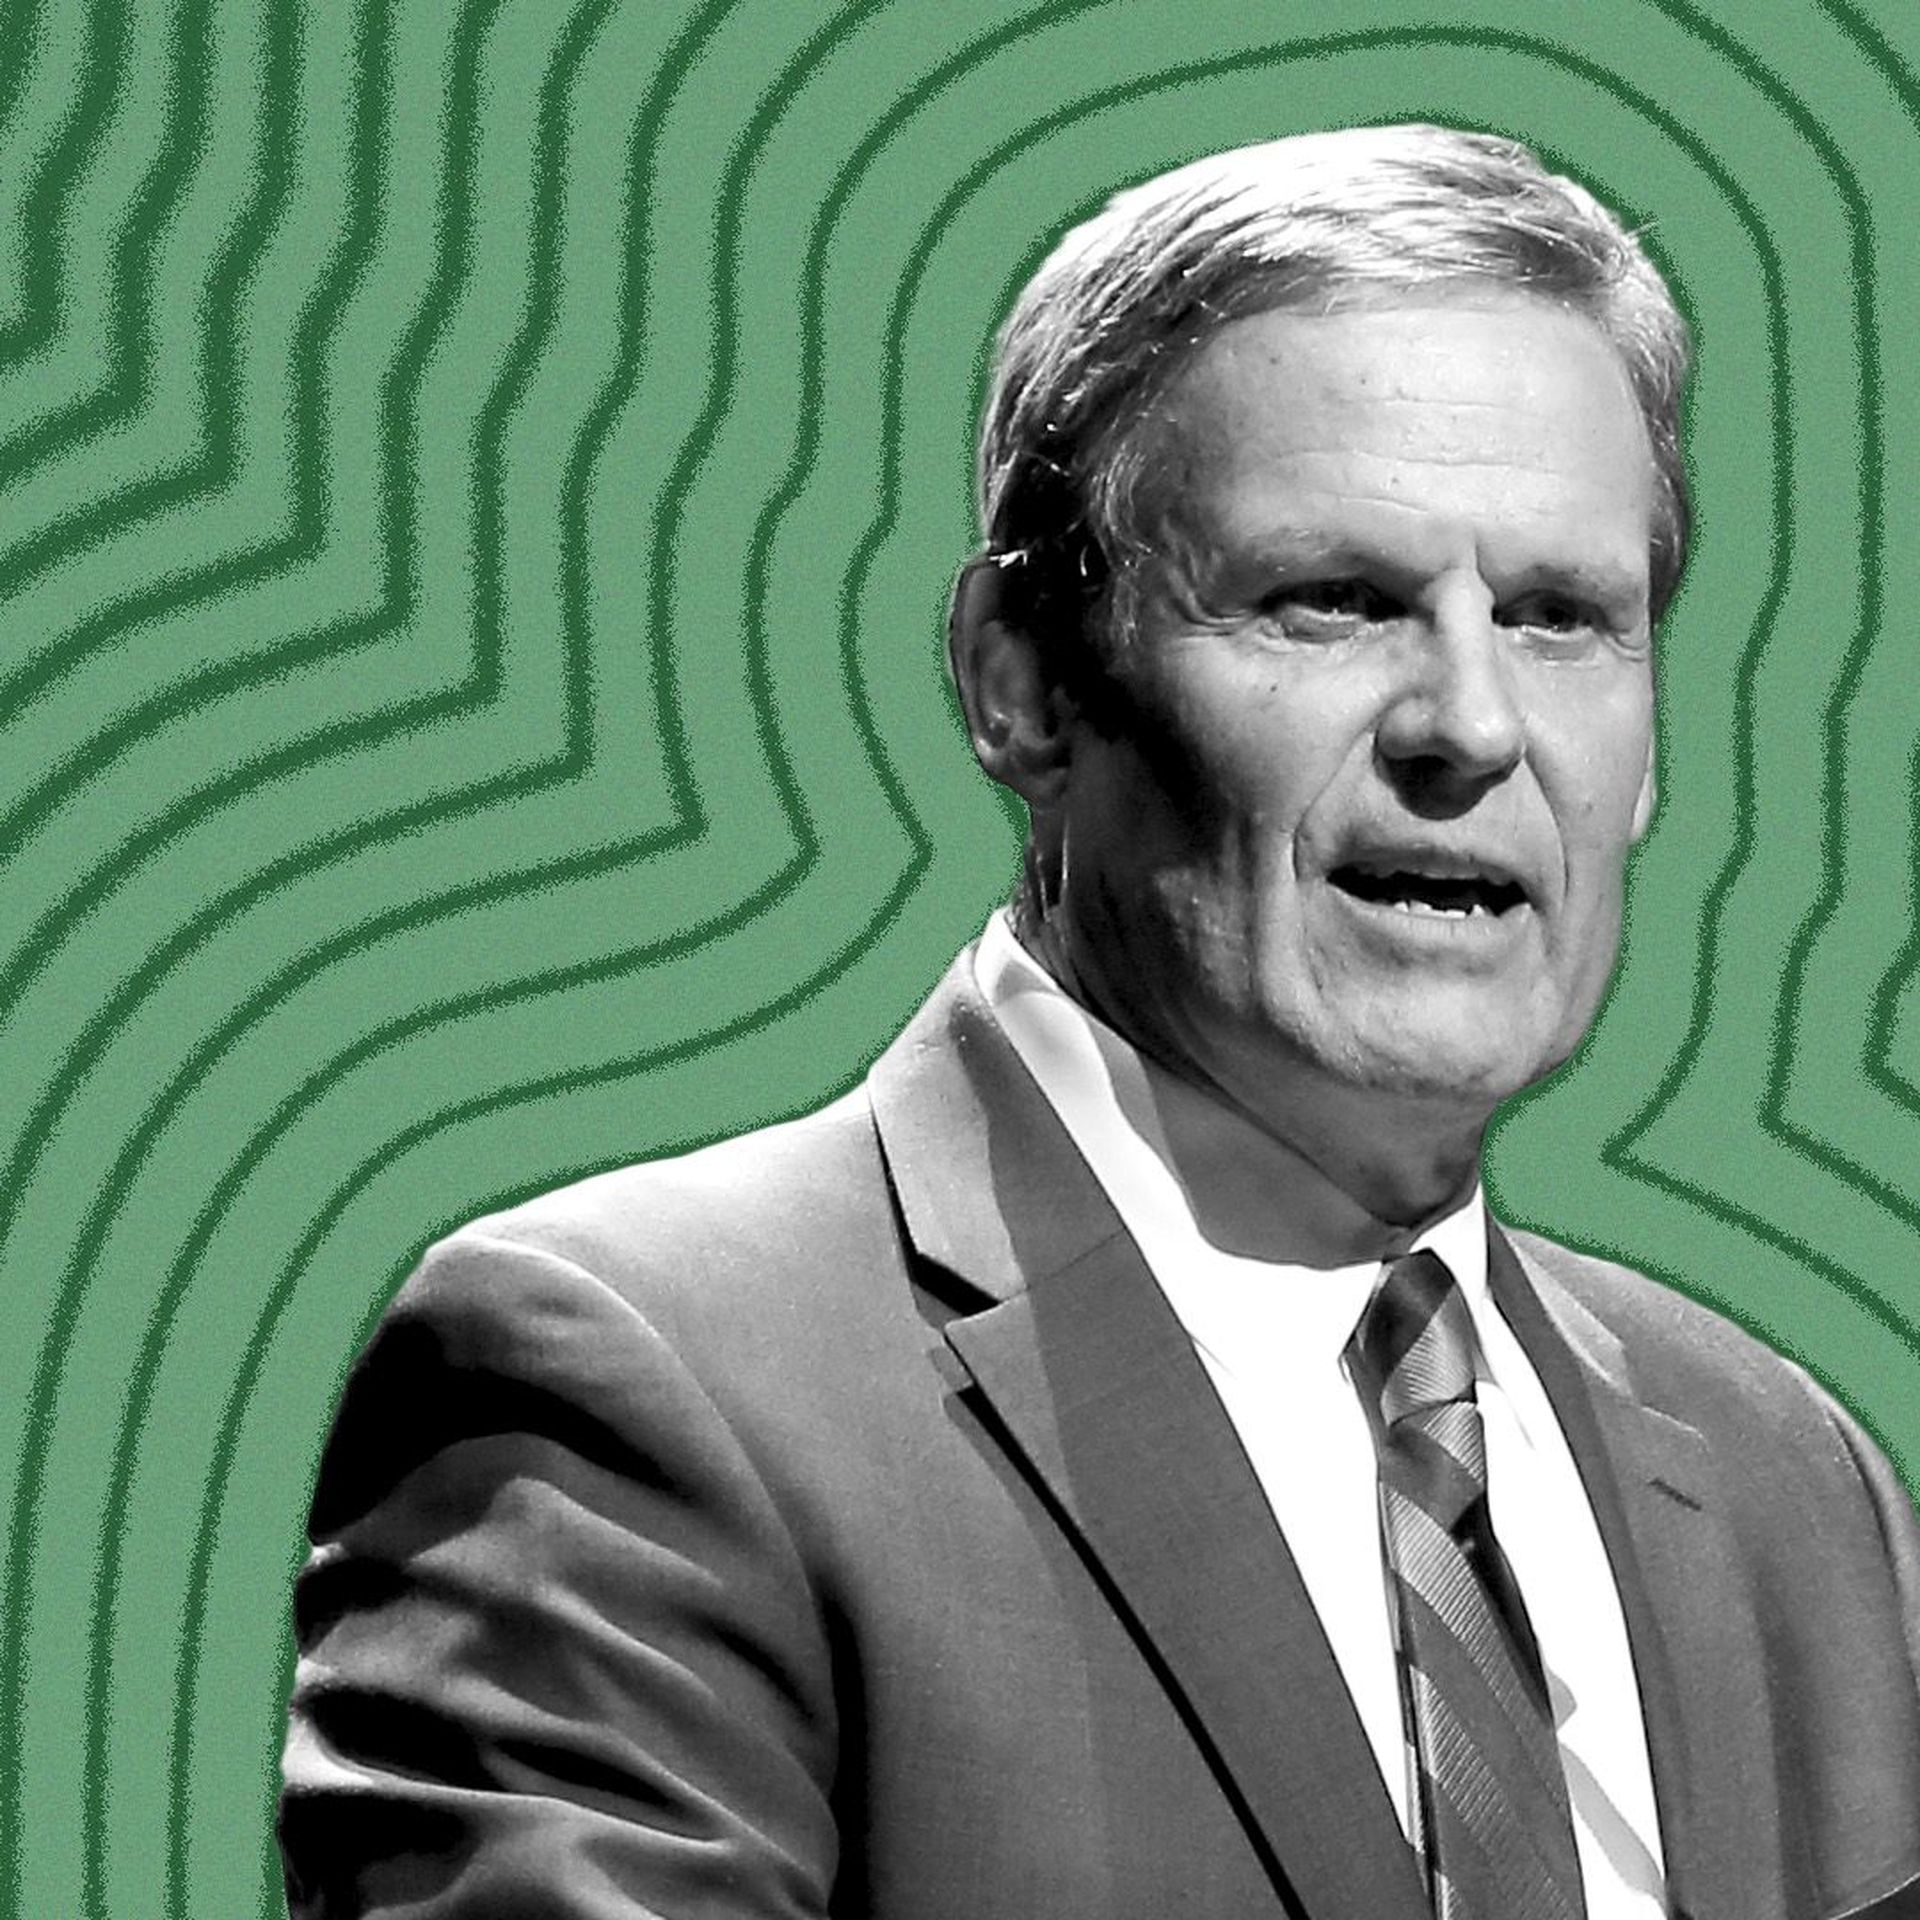 Photo illustration of Tennessee Governor Bill Lee with lines radiating from him.